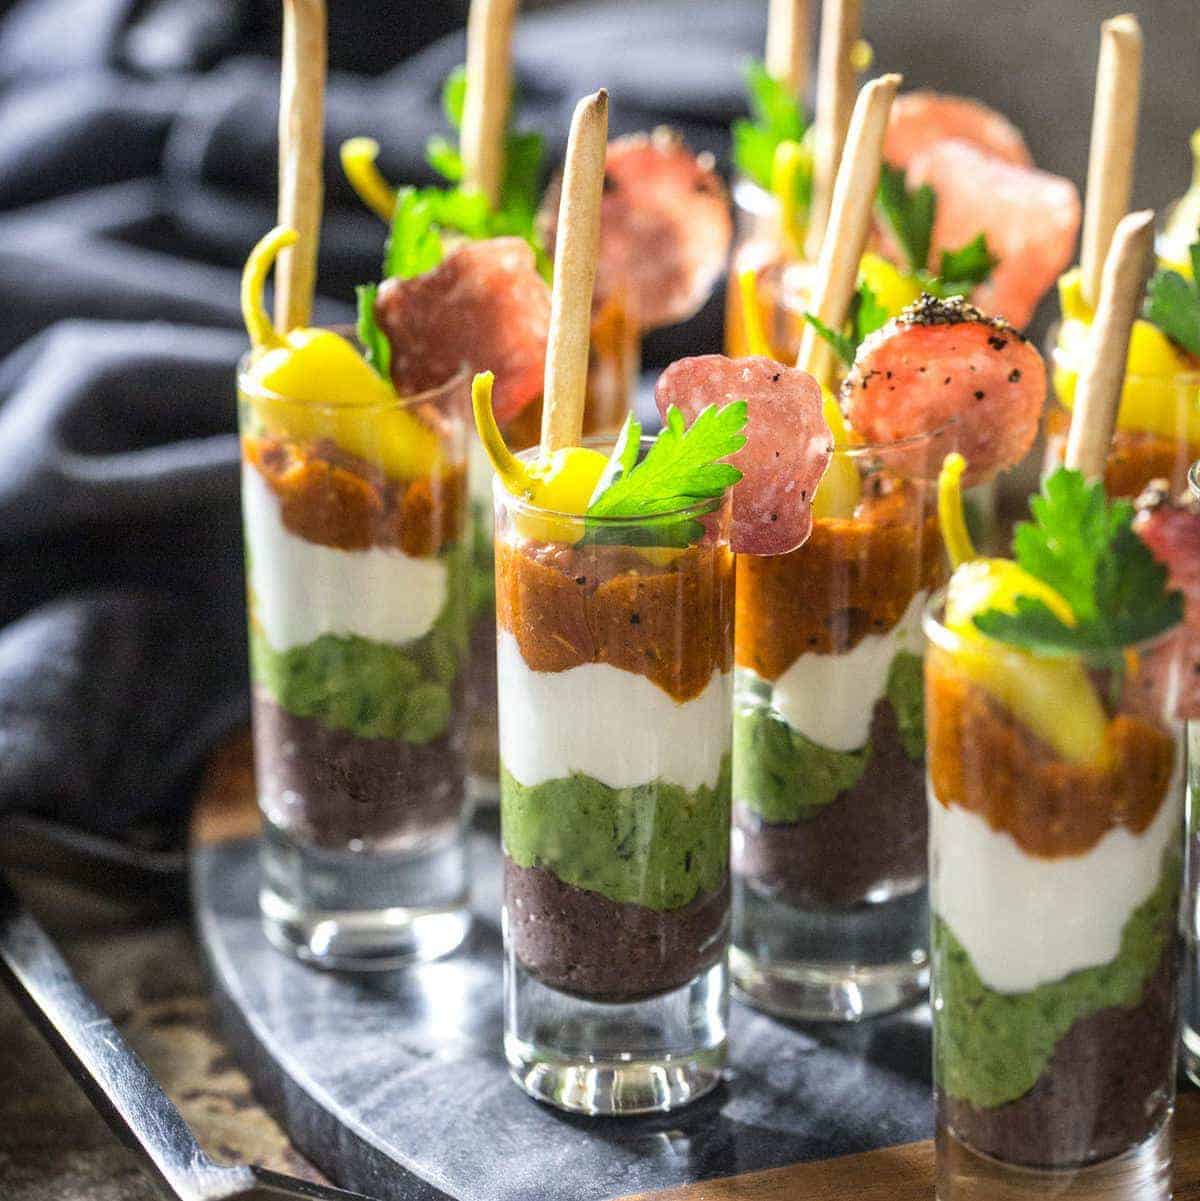 Layered Mediterranean Dip Shooters with Bread Sticks and Garnishes